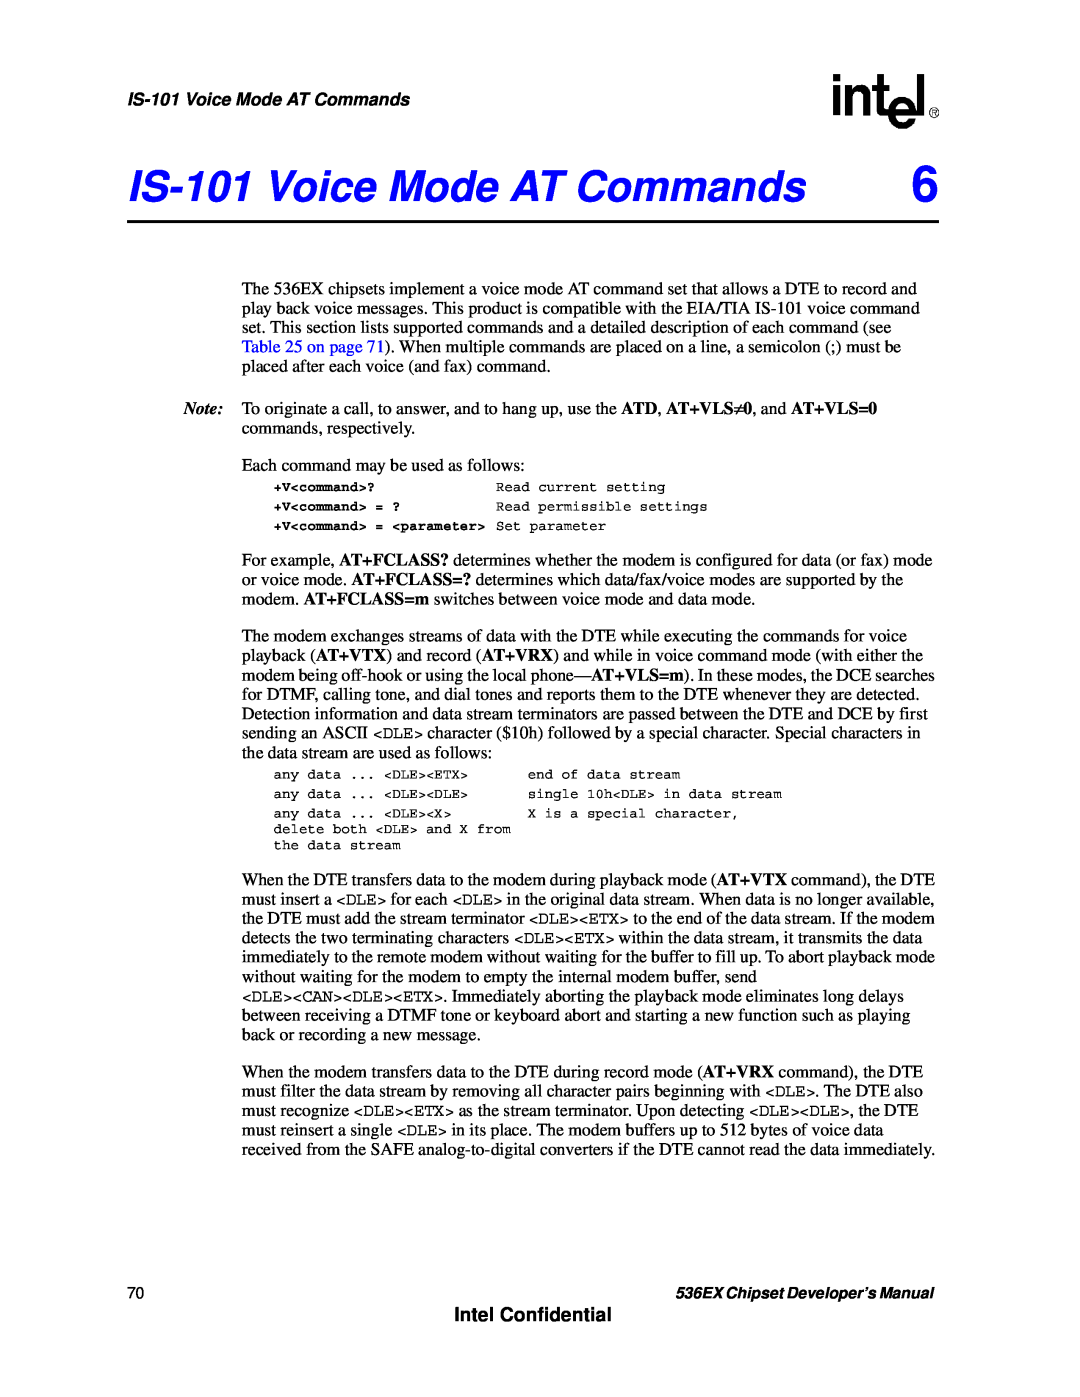 Intel 537EX manual IS-101Voice Mode AT Commands, Intel Confidential 